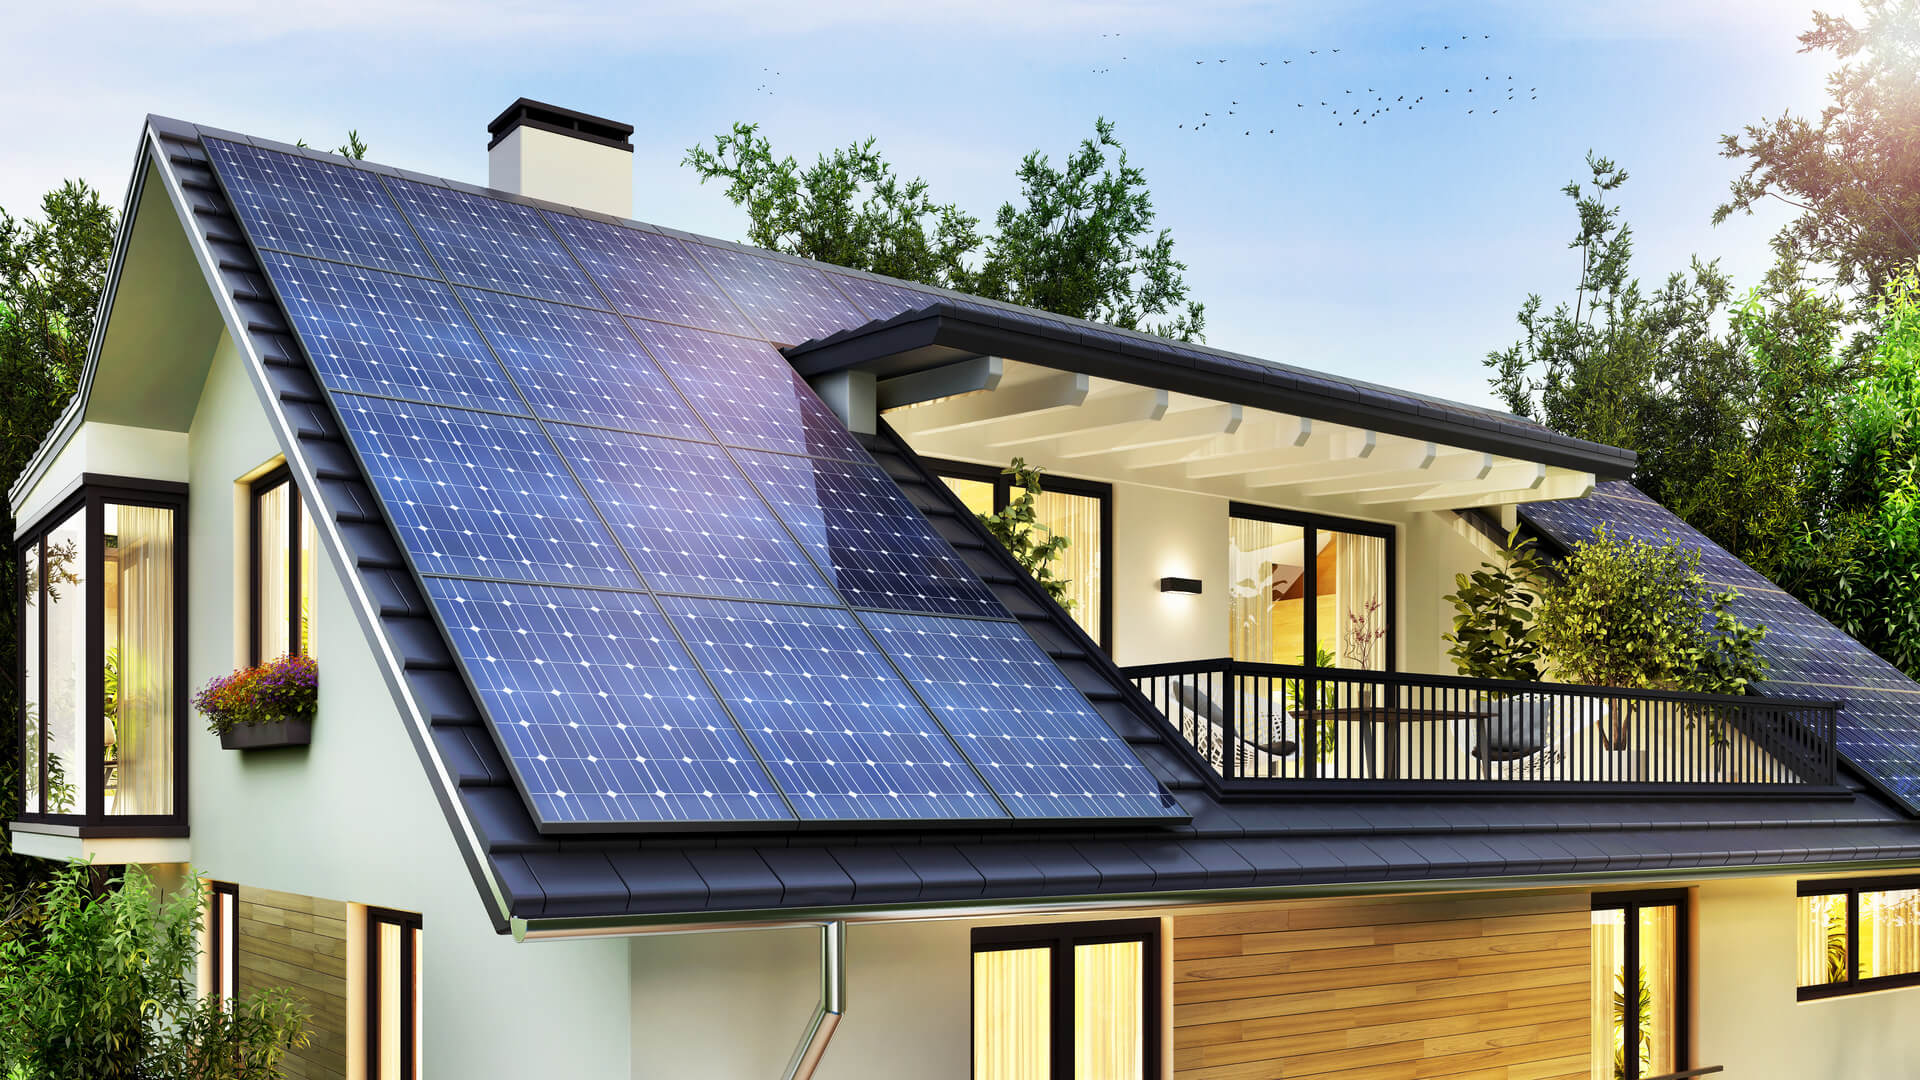 Solar panels have four major benefits for your home